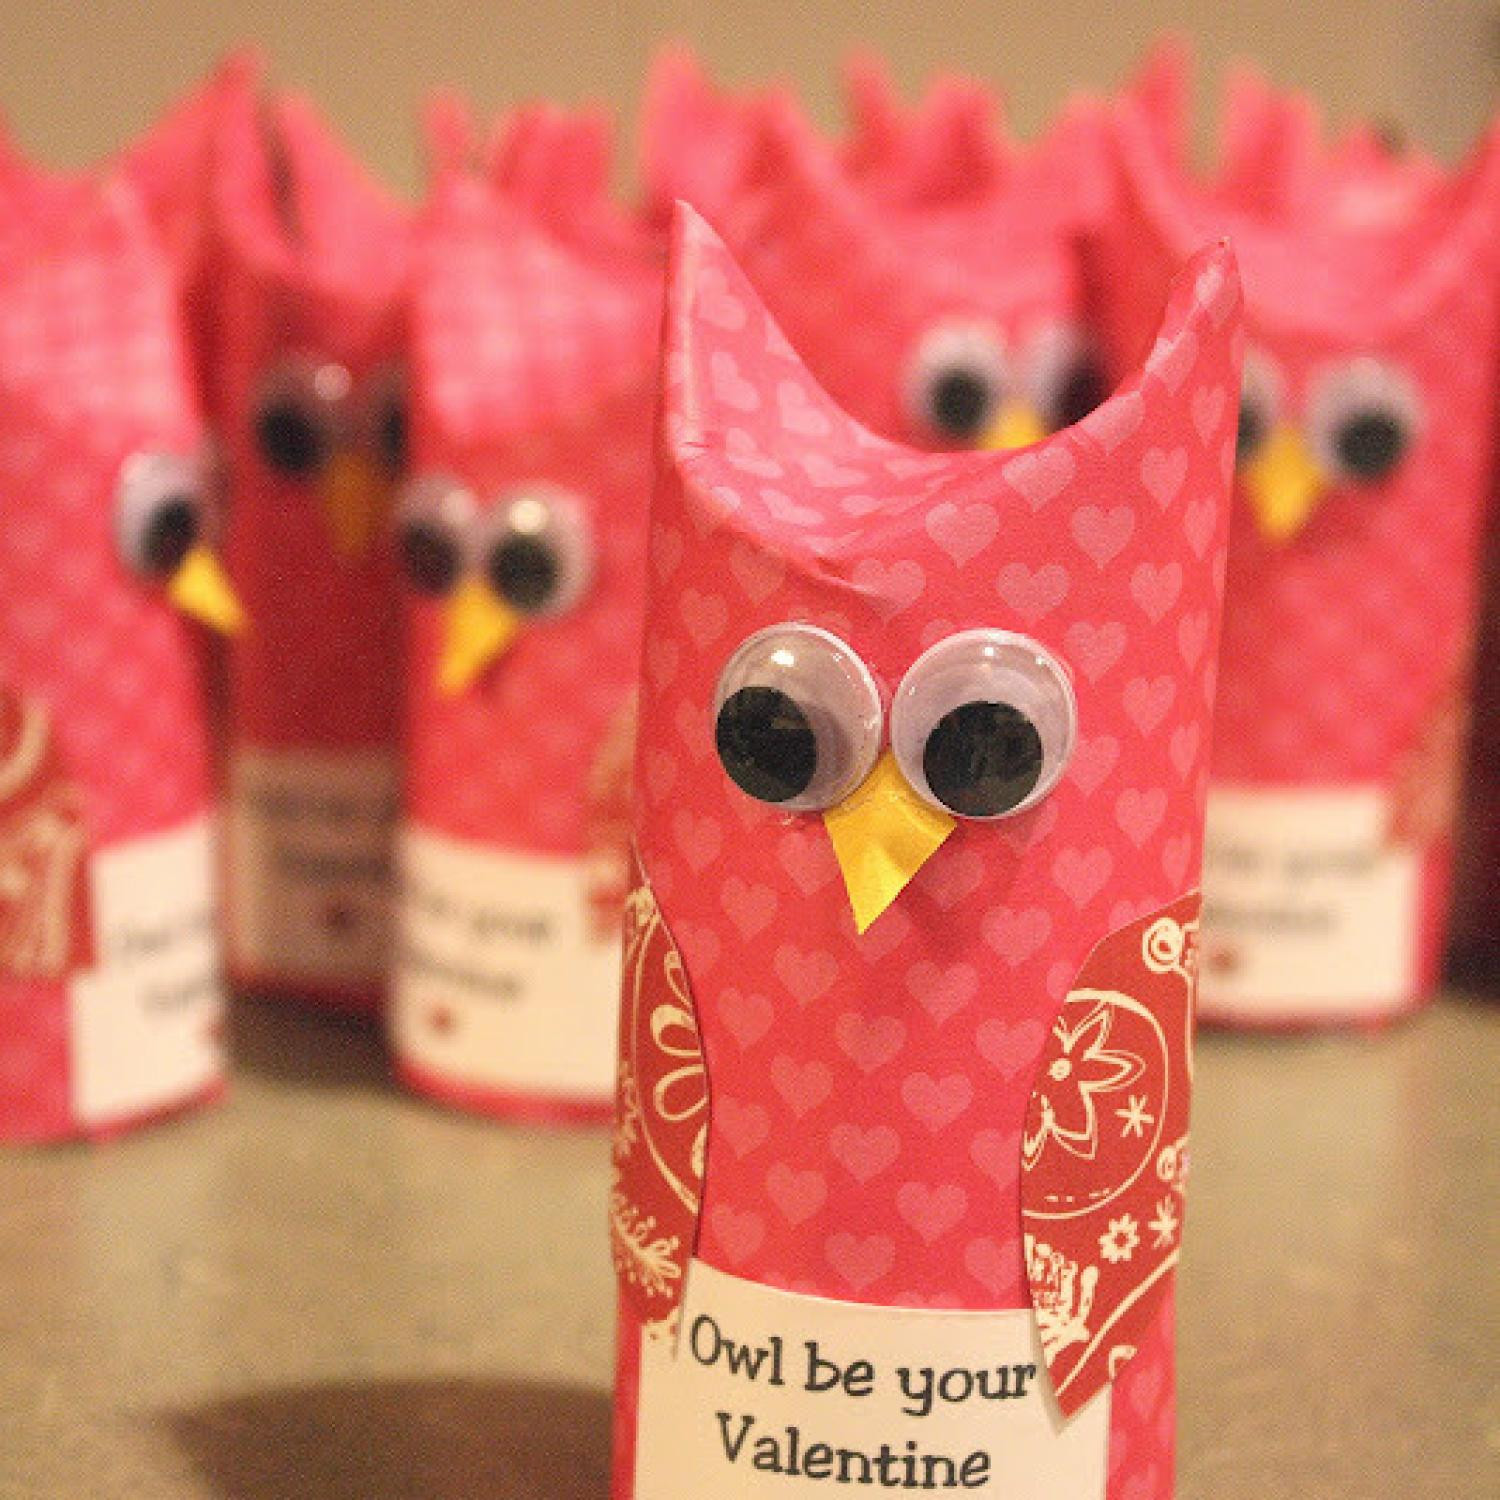 Valentines Day Gift Ideas For Parents
 Our Favorite Homemade Valentines for Kids